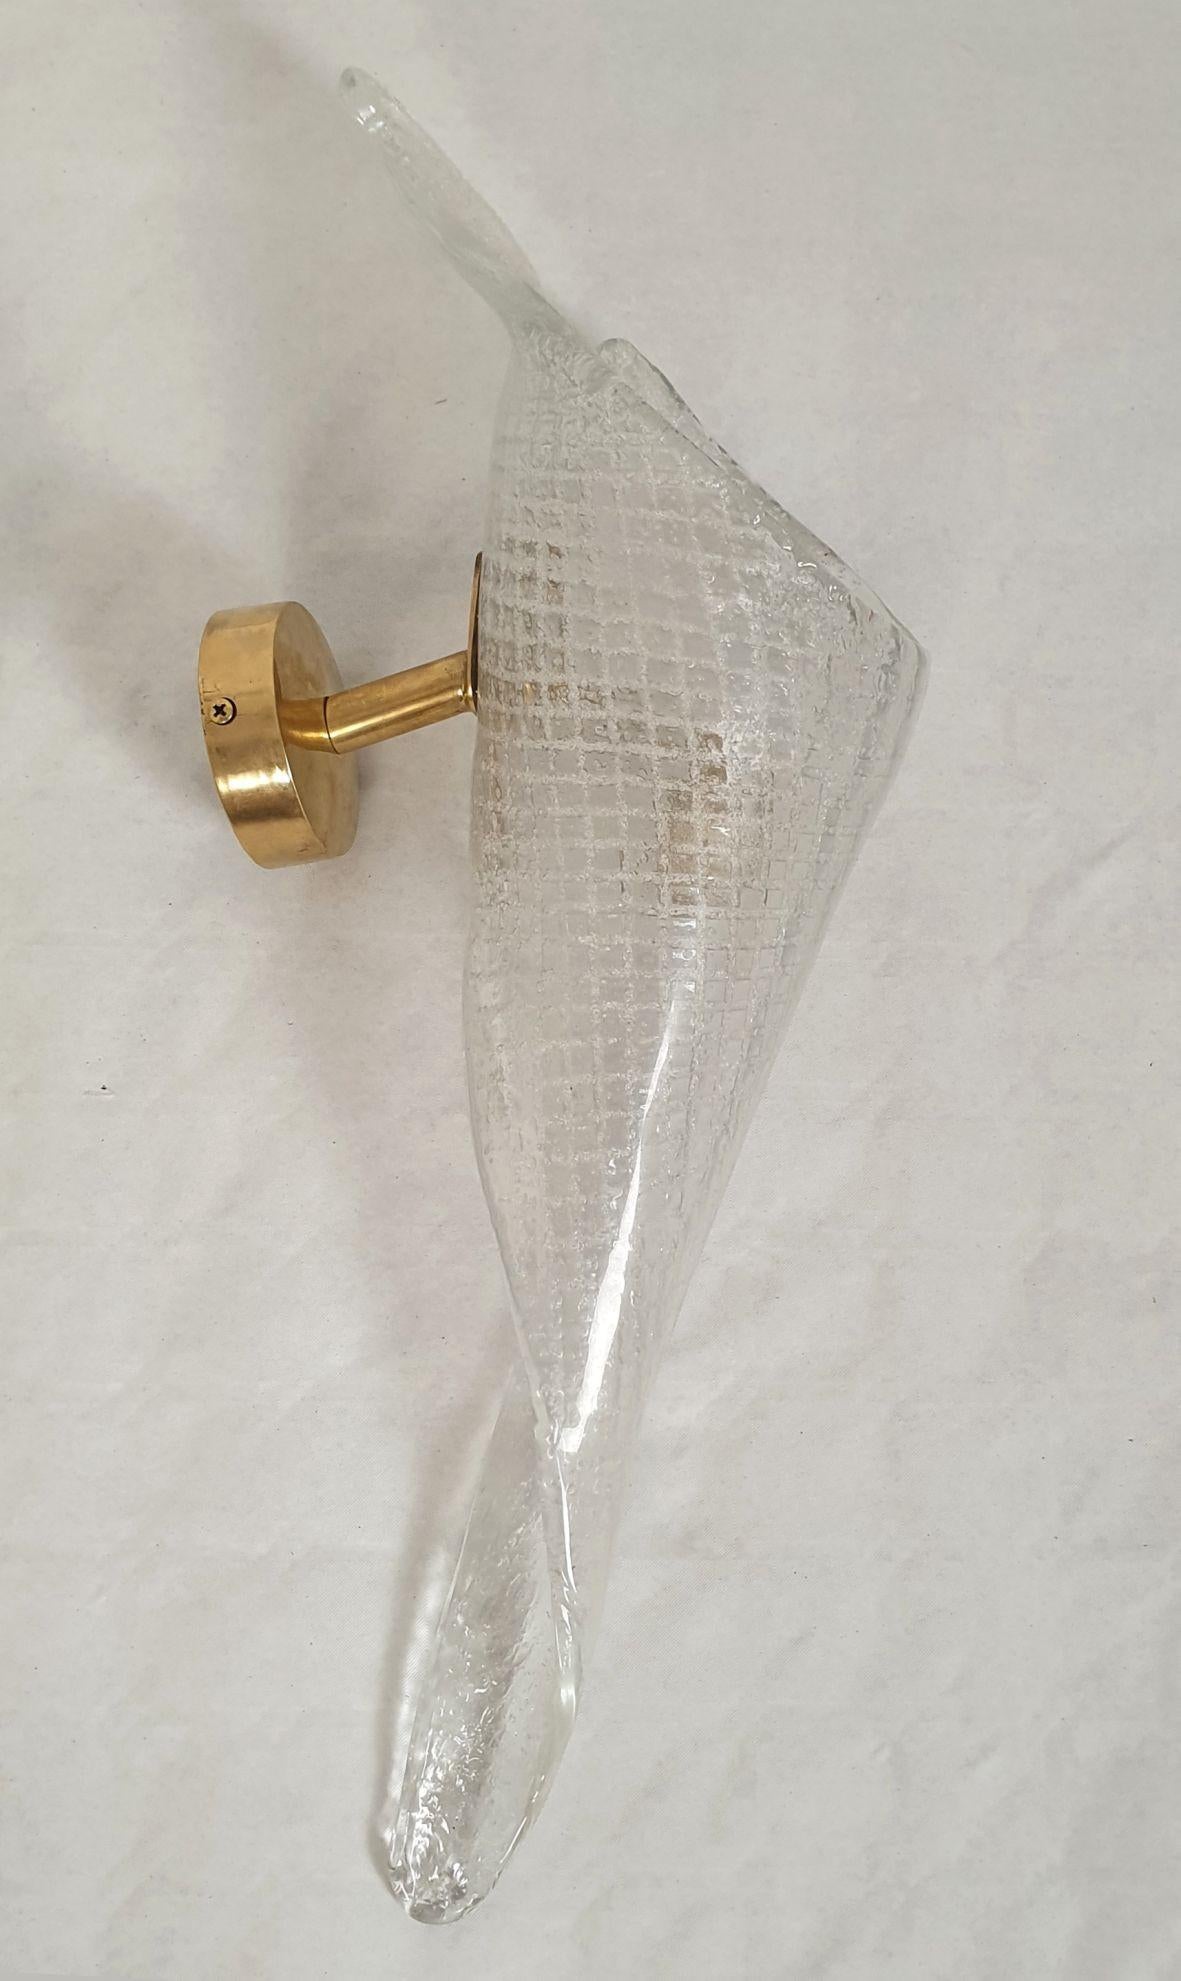 Pair of clear handmade Murano glass sconces, attributed to Seguso, Italy 1970s.
The Mid-Century sconces have brass mounts and a translucent twisted shape Murano glass shade.
The hand-blown and thick Murano glass has a grid pattern.
Each sconce has 1